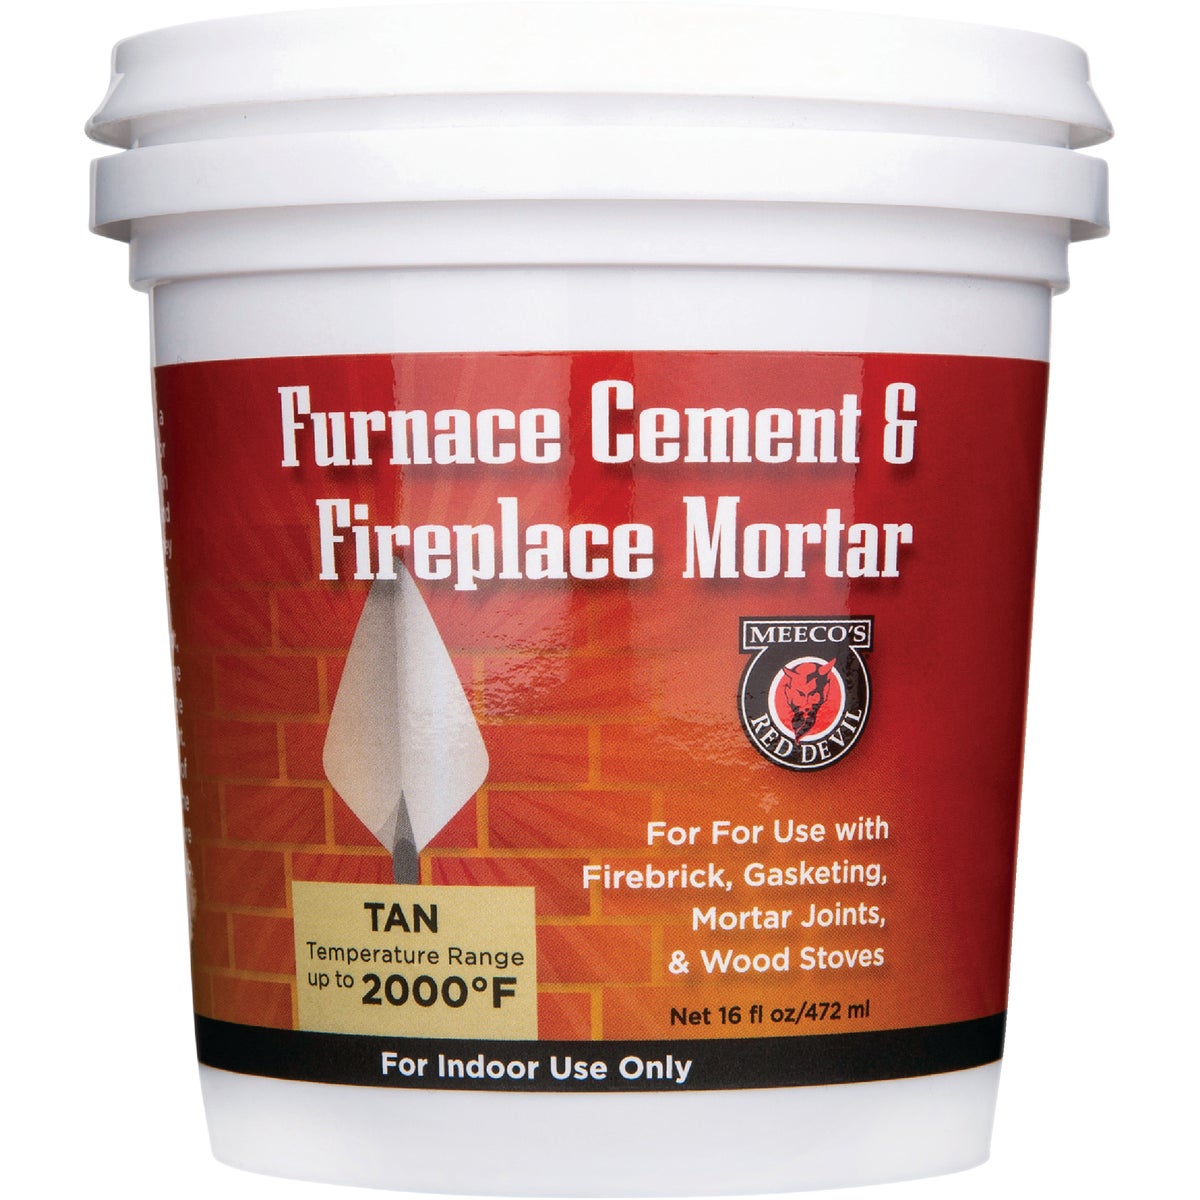 Meeco's Red Devil 1373 Meeco's Red Devil 1 Pt. Tan Furnace Cement & Fireplace Mortar 1373